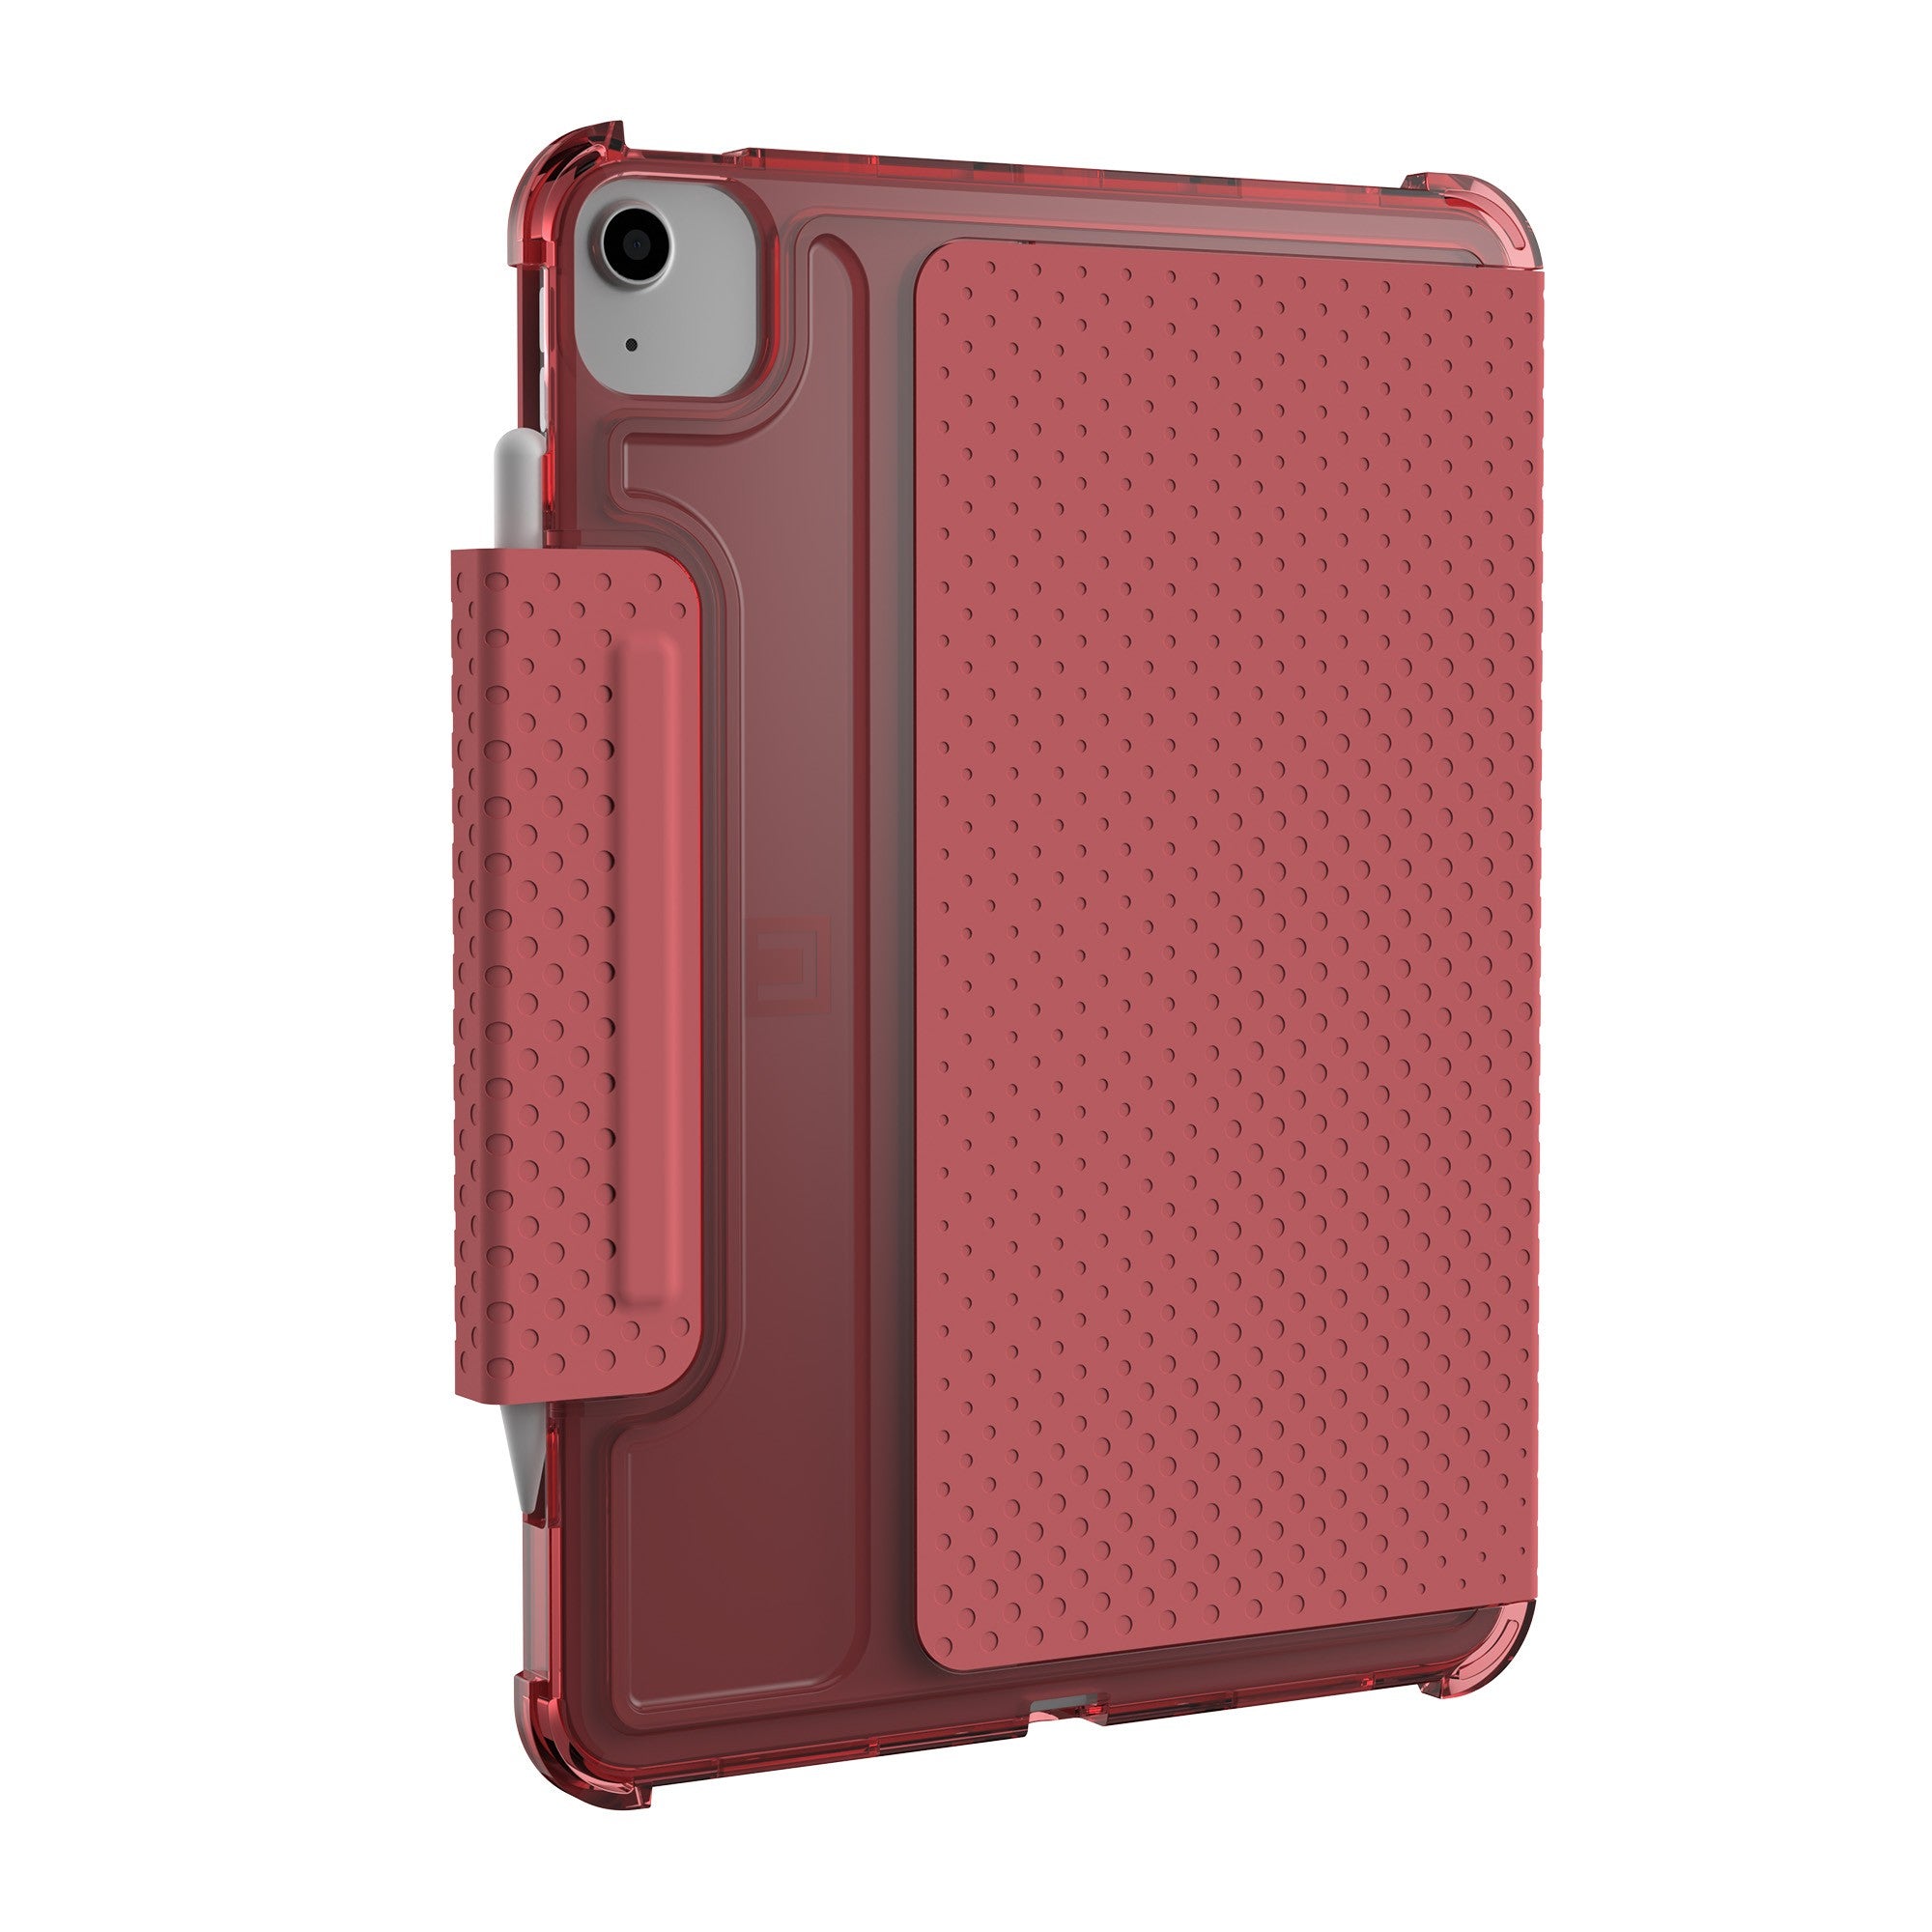 iPad Air 10.9 (2022) (5th Gen) UAG Lucent Case - Pink (Clay) - 15-09499